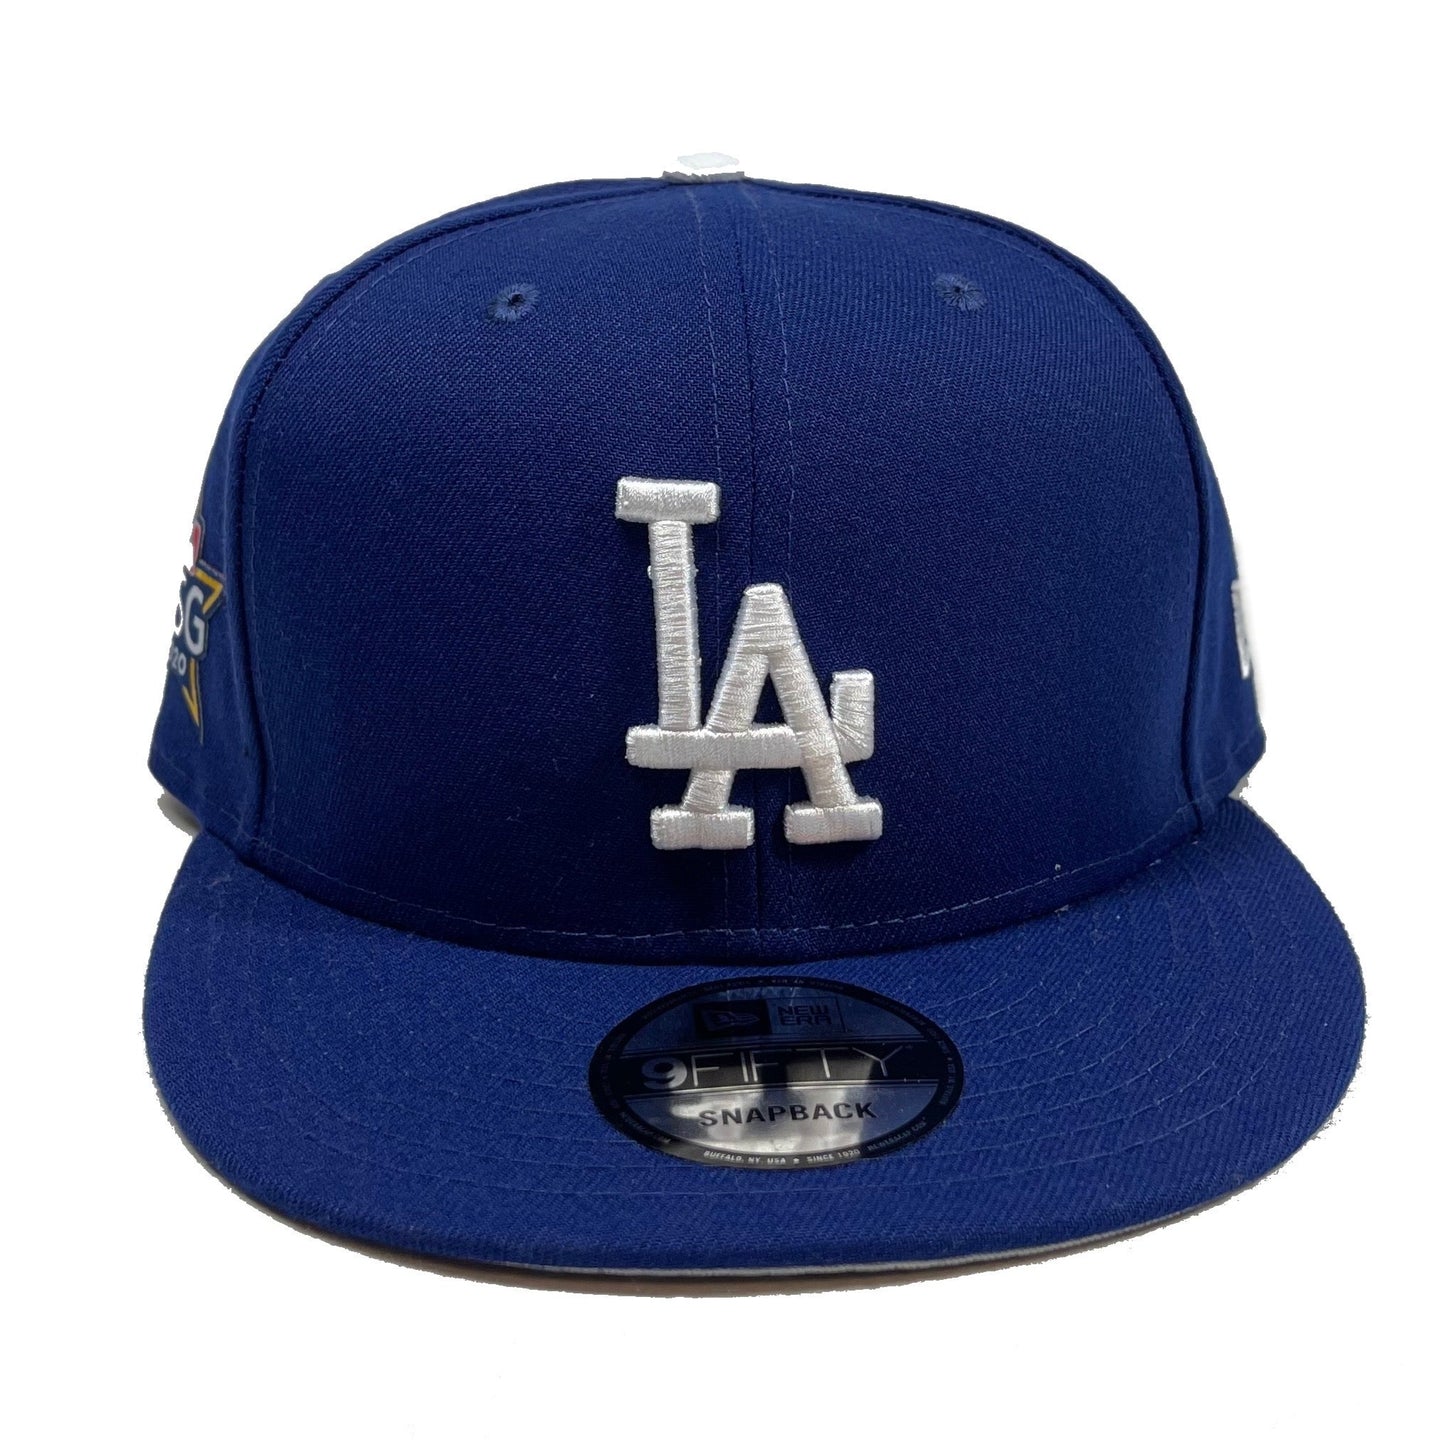 Los Angeles Dodgers ASG (Blue) Snapback